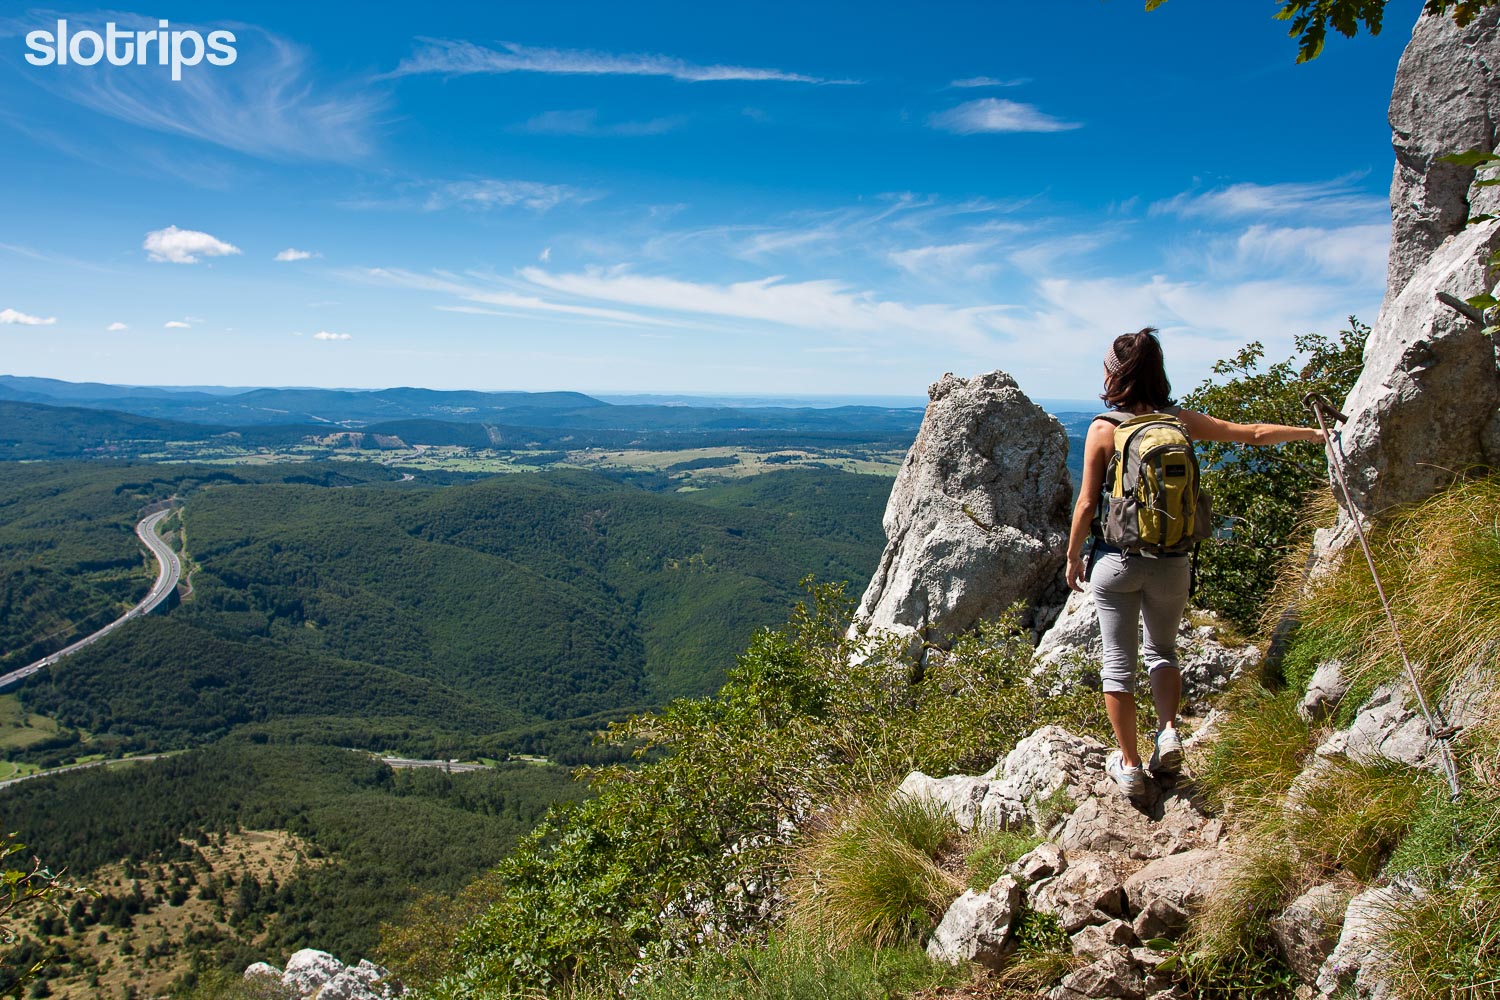 Hiker on a cliff of the Mount Nanos via ferrata trail enjoys the beautiful panorama view over the wooded hills of Primorska region on a sunshiny day.